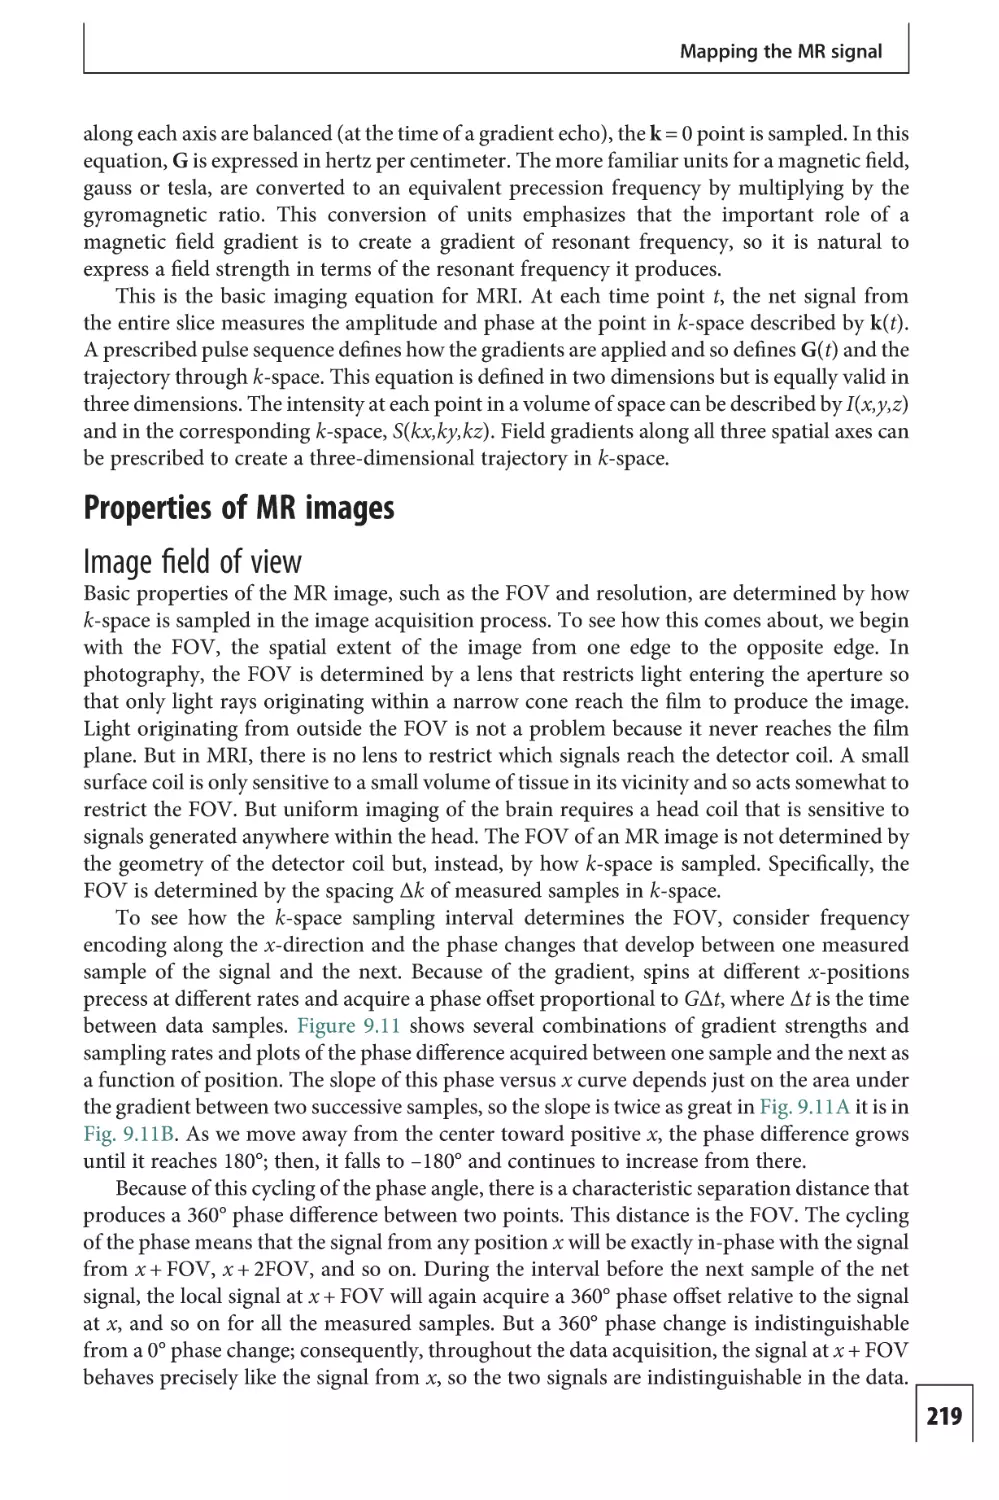 Properties of MR images
Image field of view